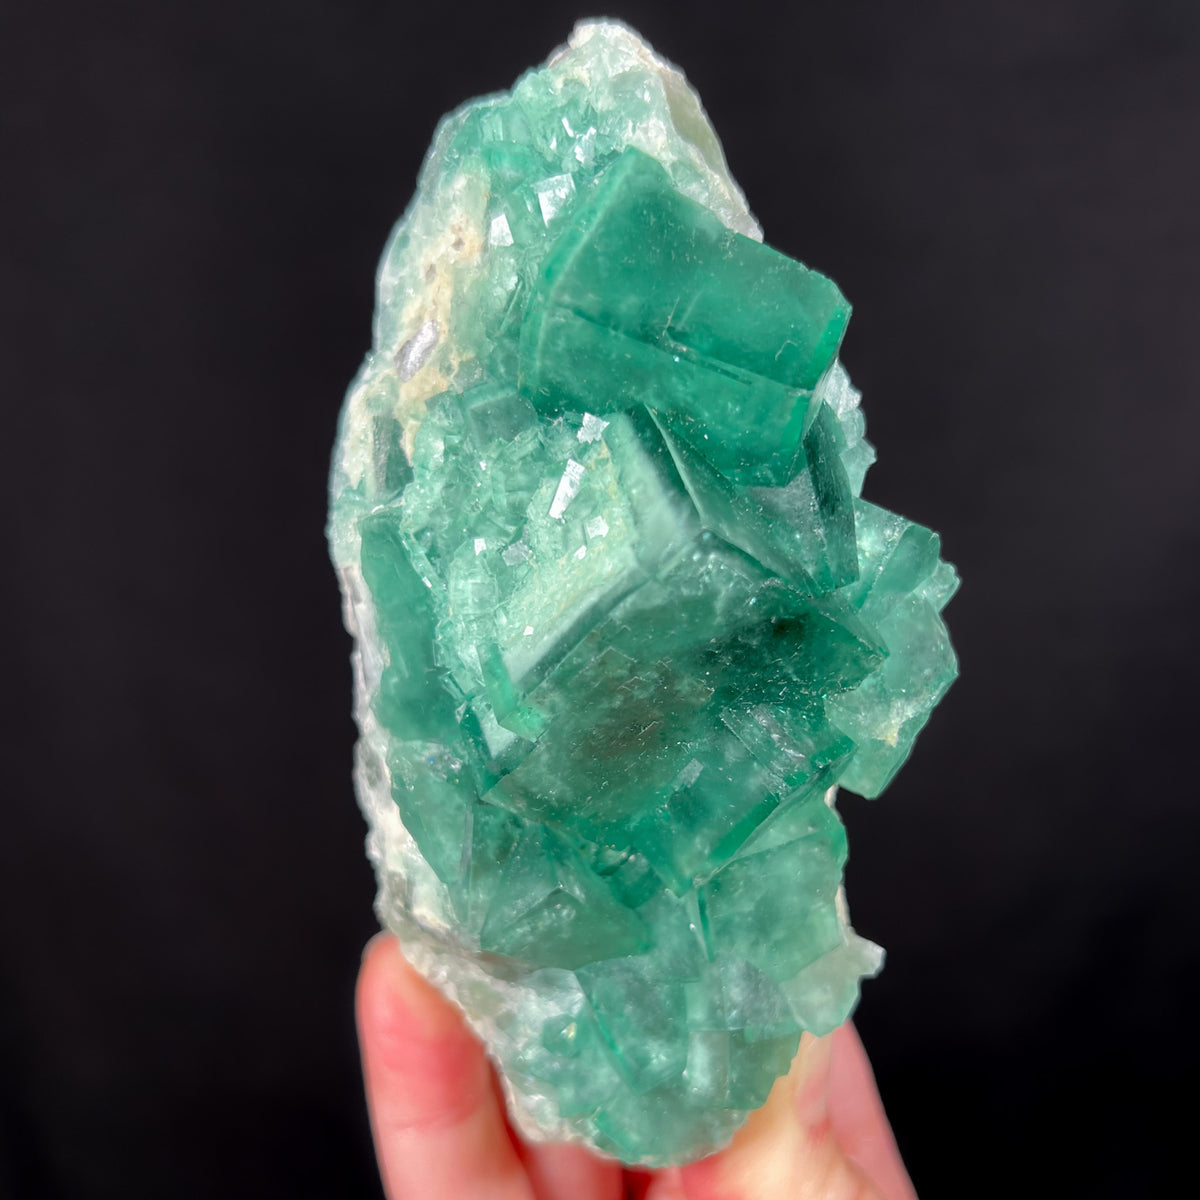 Green Fluorite Crystals with Zoning